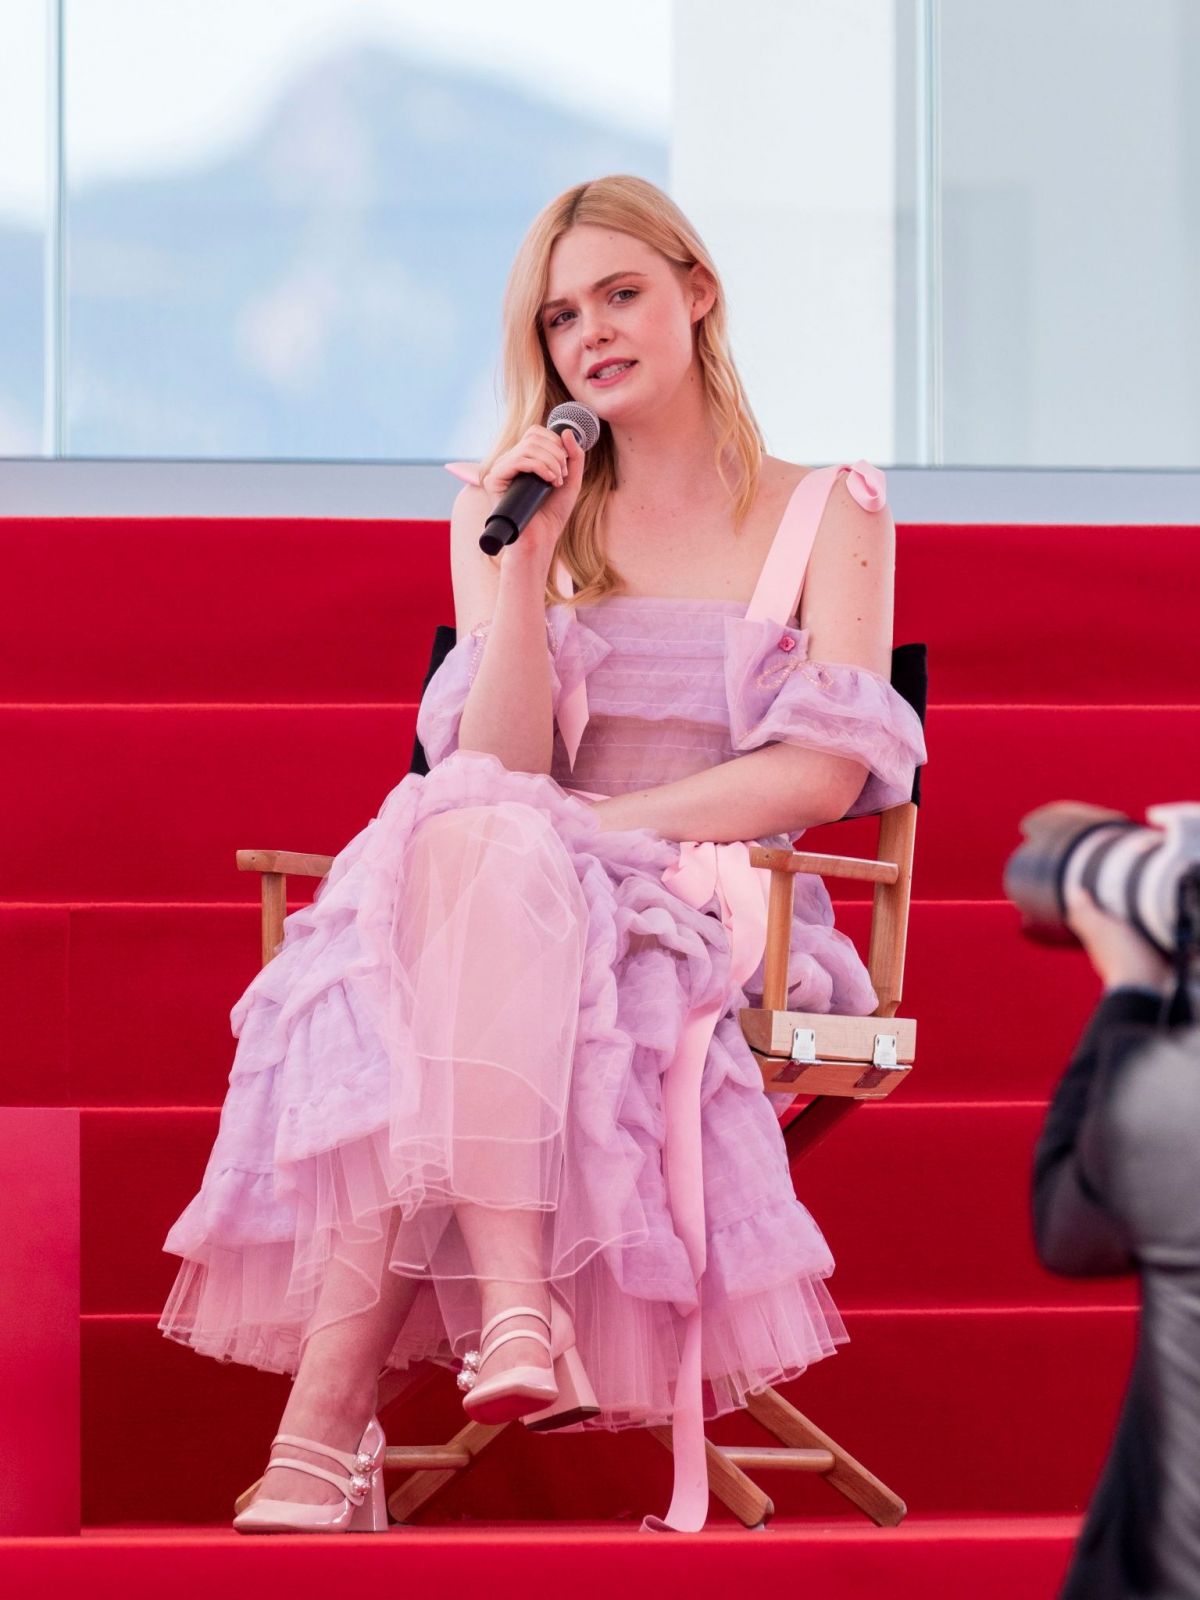 elle-fanning-at-an-interview-on-the-croisette-in-cannes-05-14-2019-4.jpg